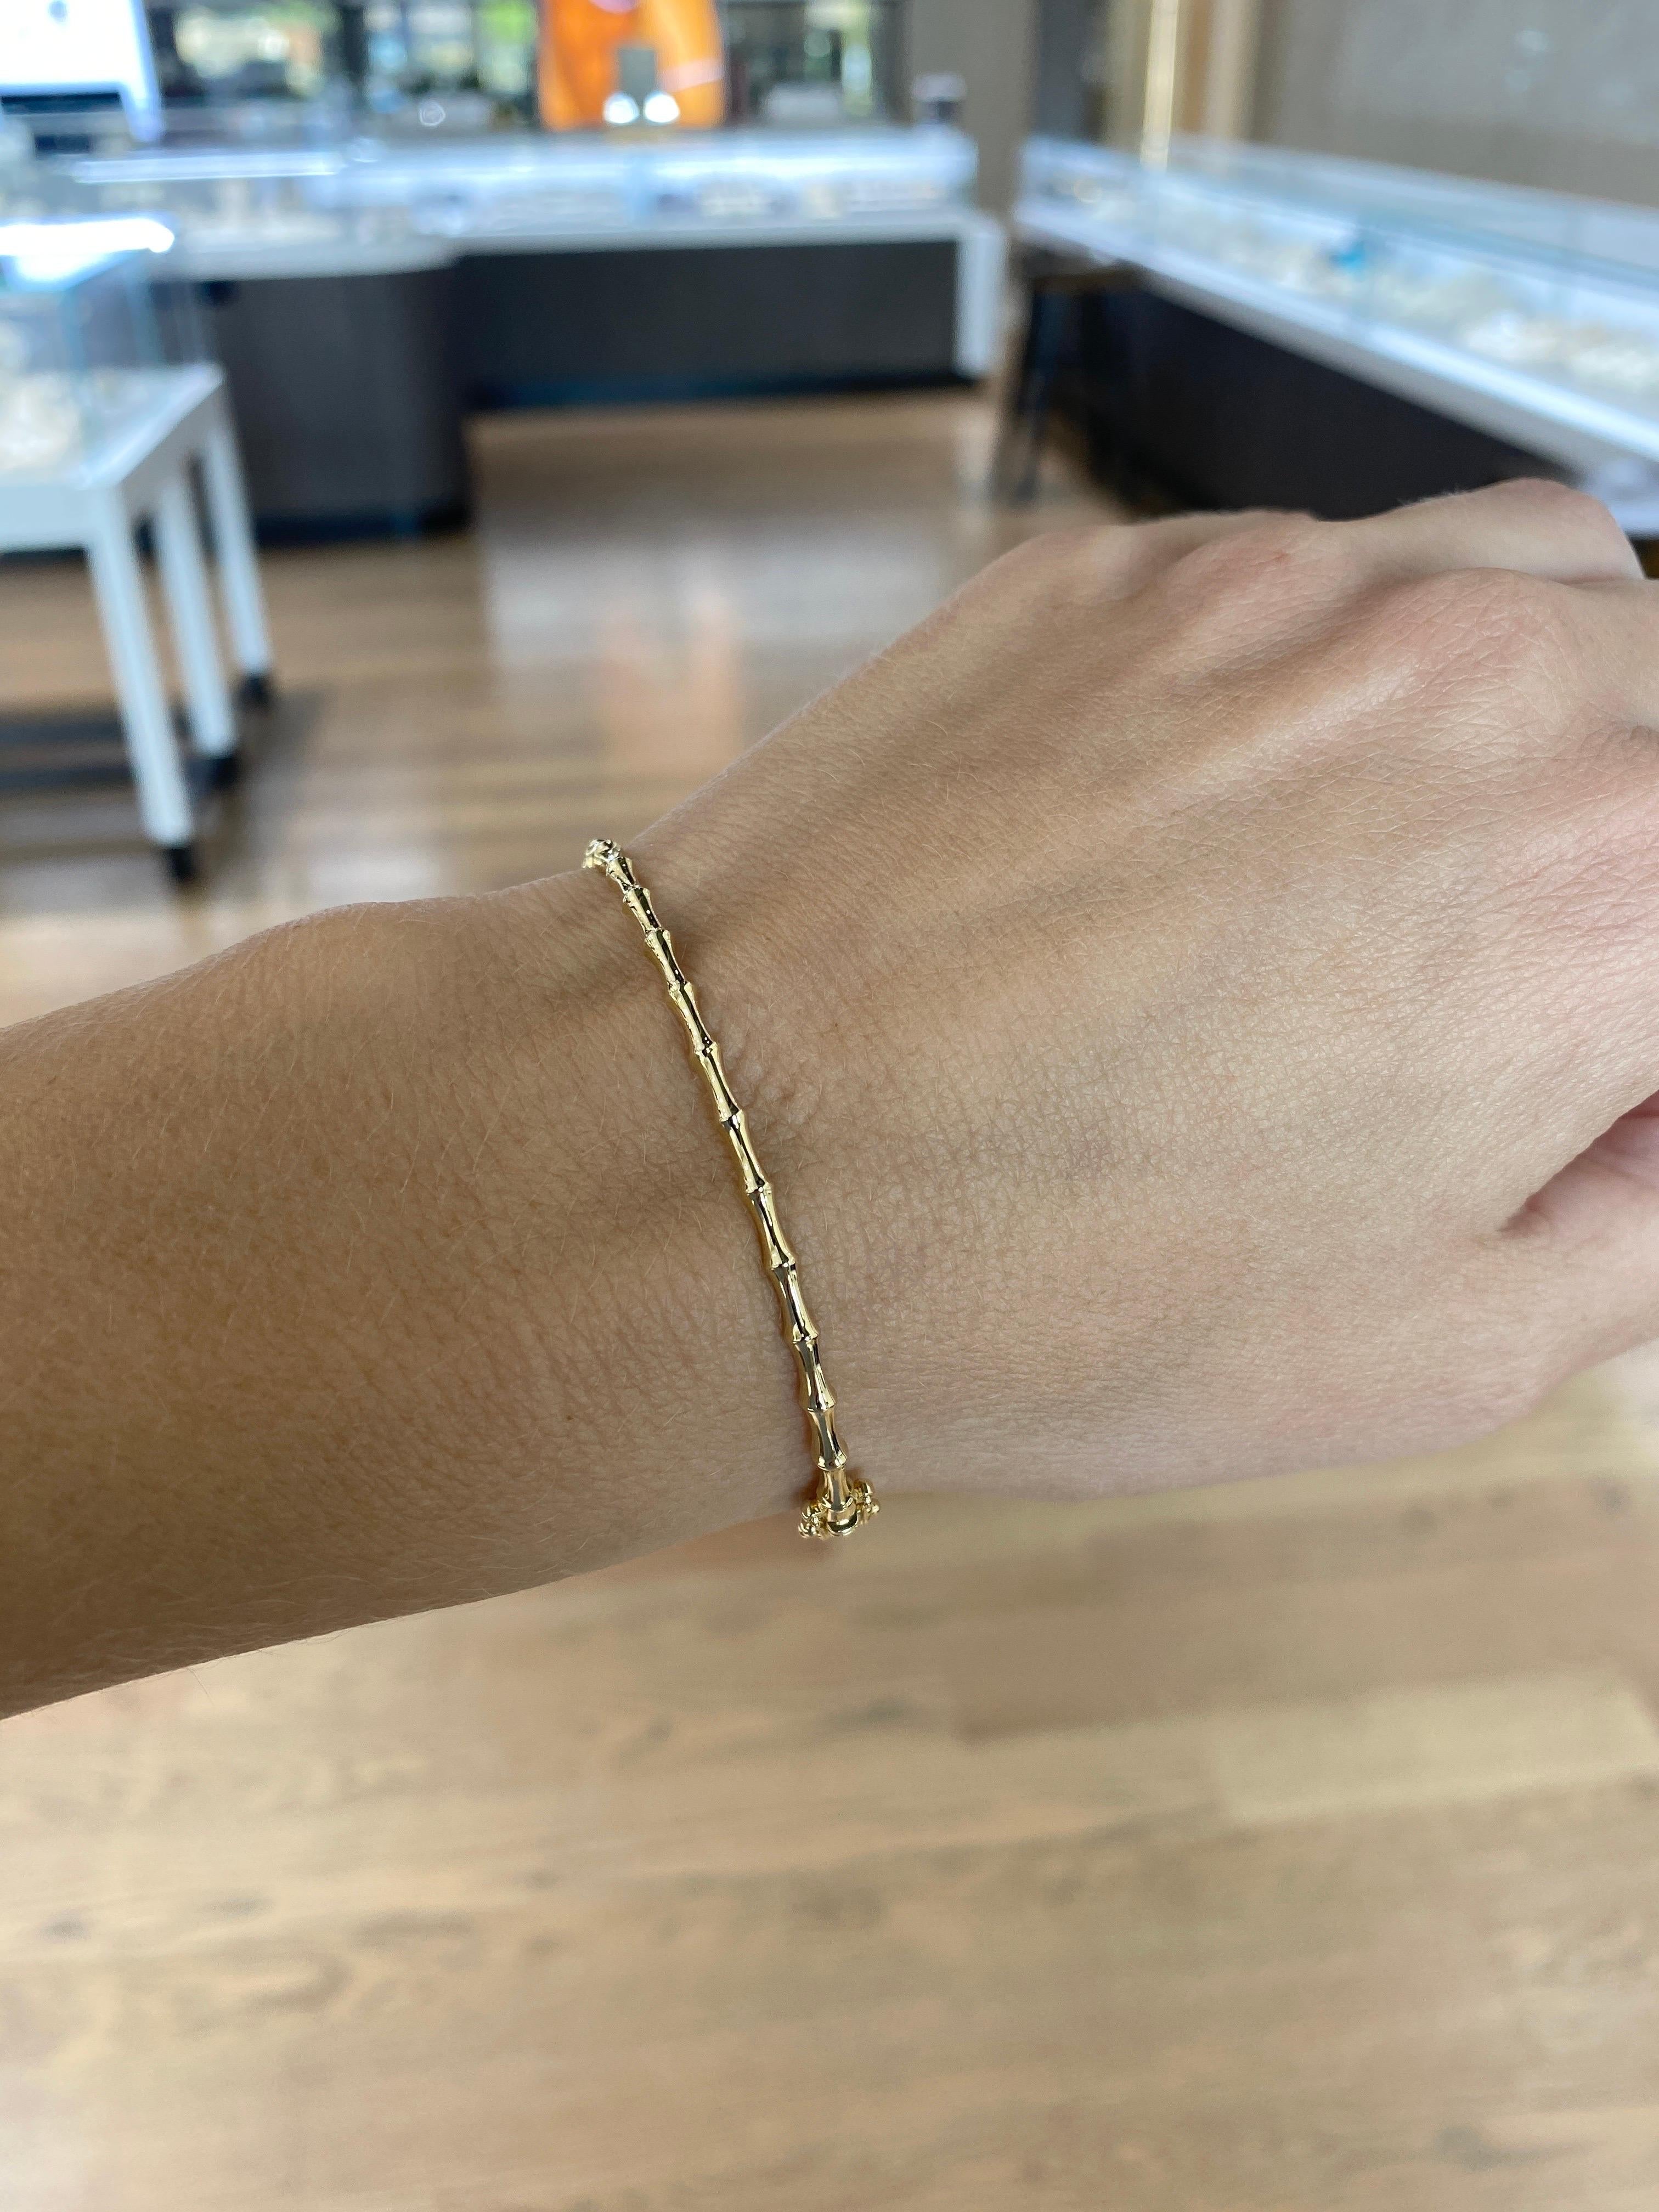 This beautiful bangle features a bamboo motif crafted in 14 karat yellow gold. You can wear along or layer with your favorite bracelets. Box clasp & double safety clasp closure. 
Measurements: Inner diameter approximately 57mm. Width 2.5mm